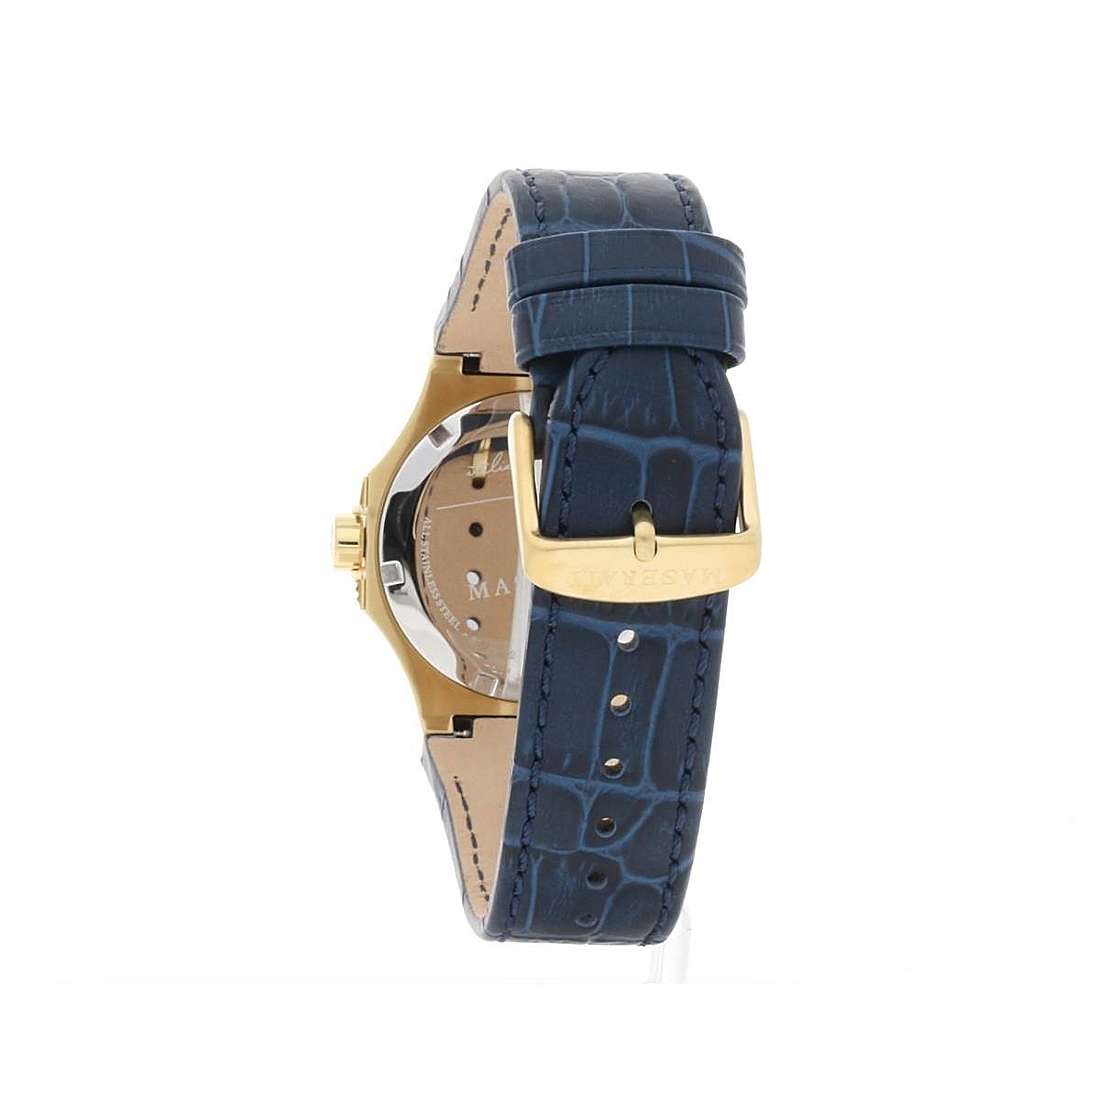 Maserati Potenza Blue Dial Blue Leather Strap Watch For Men - R8851108035